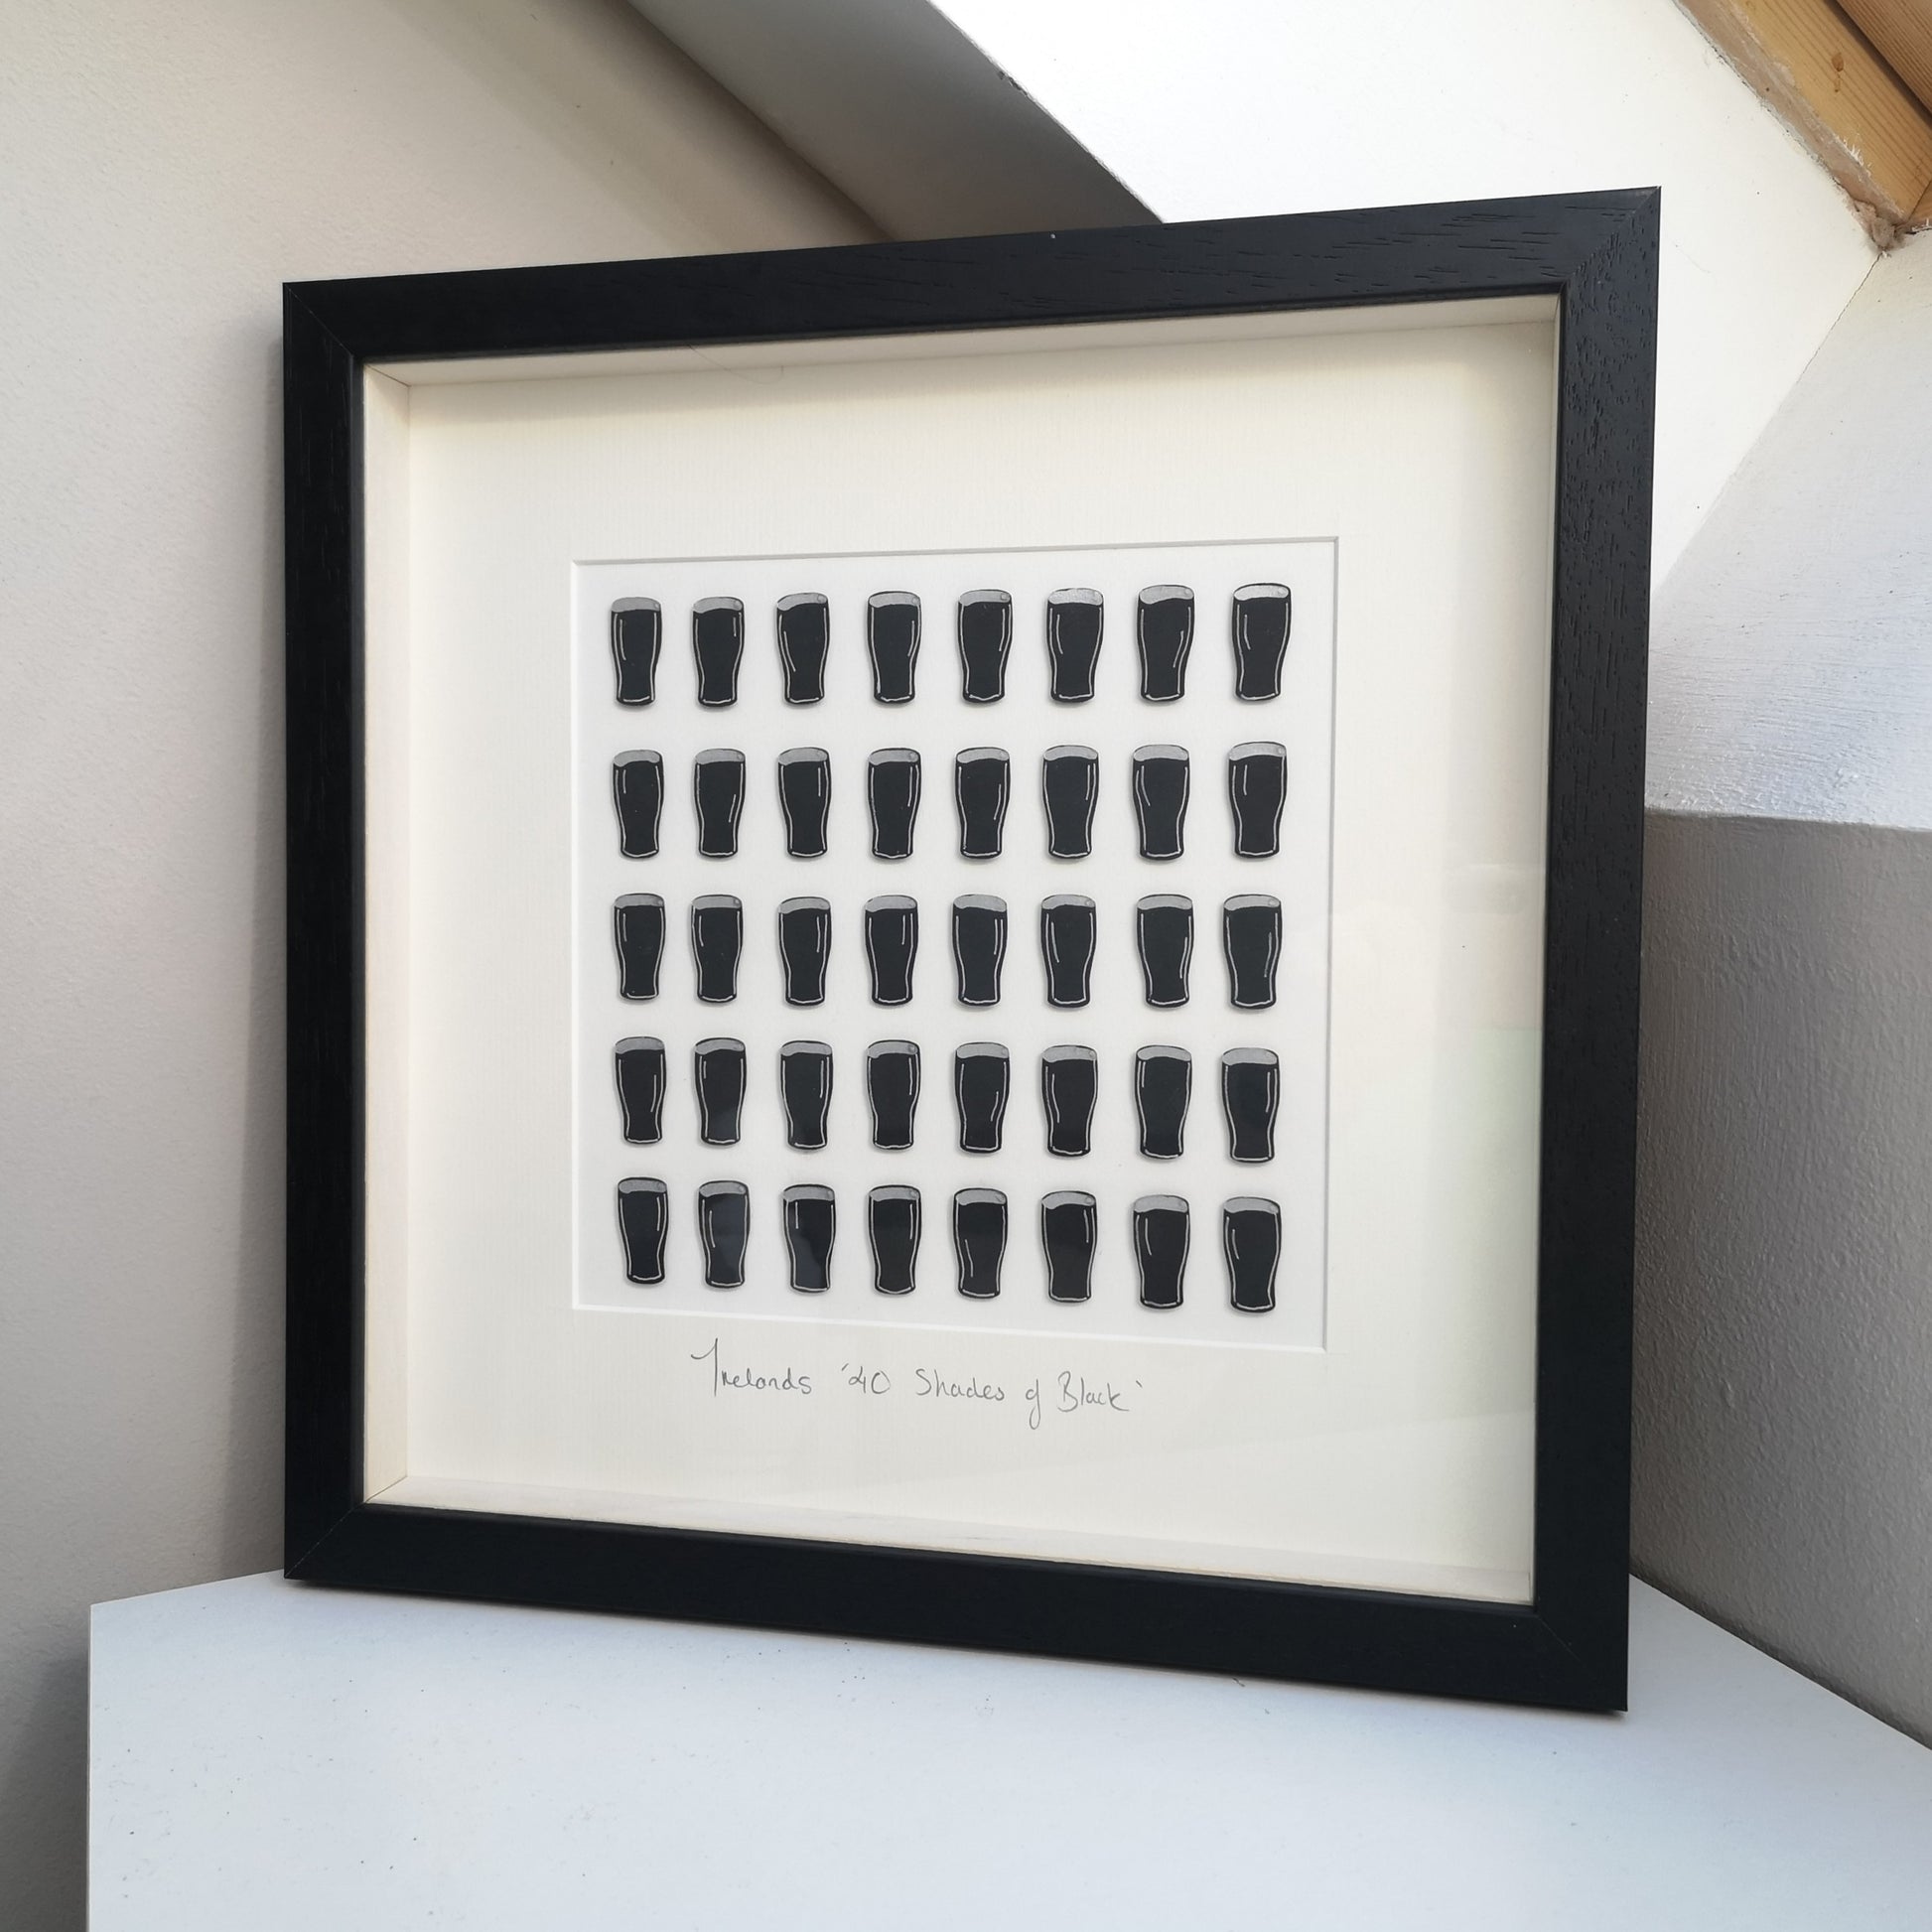 40 Shades of Black papercutting frame featuring 40 handcut and hand painted pints of guinness